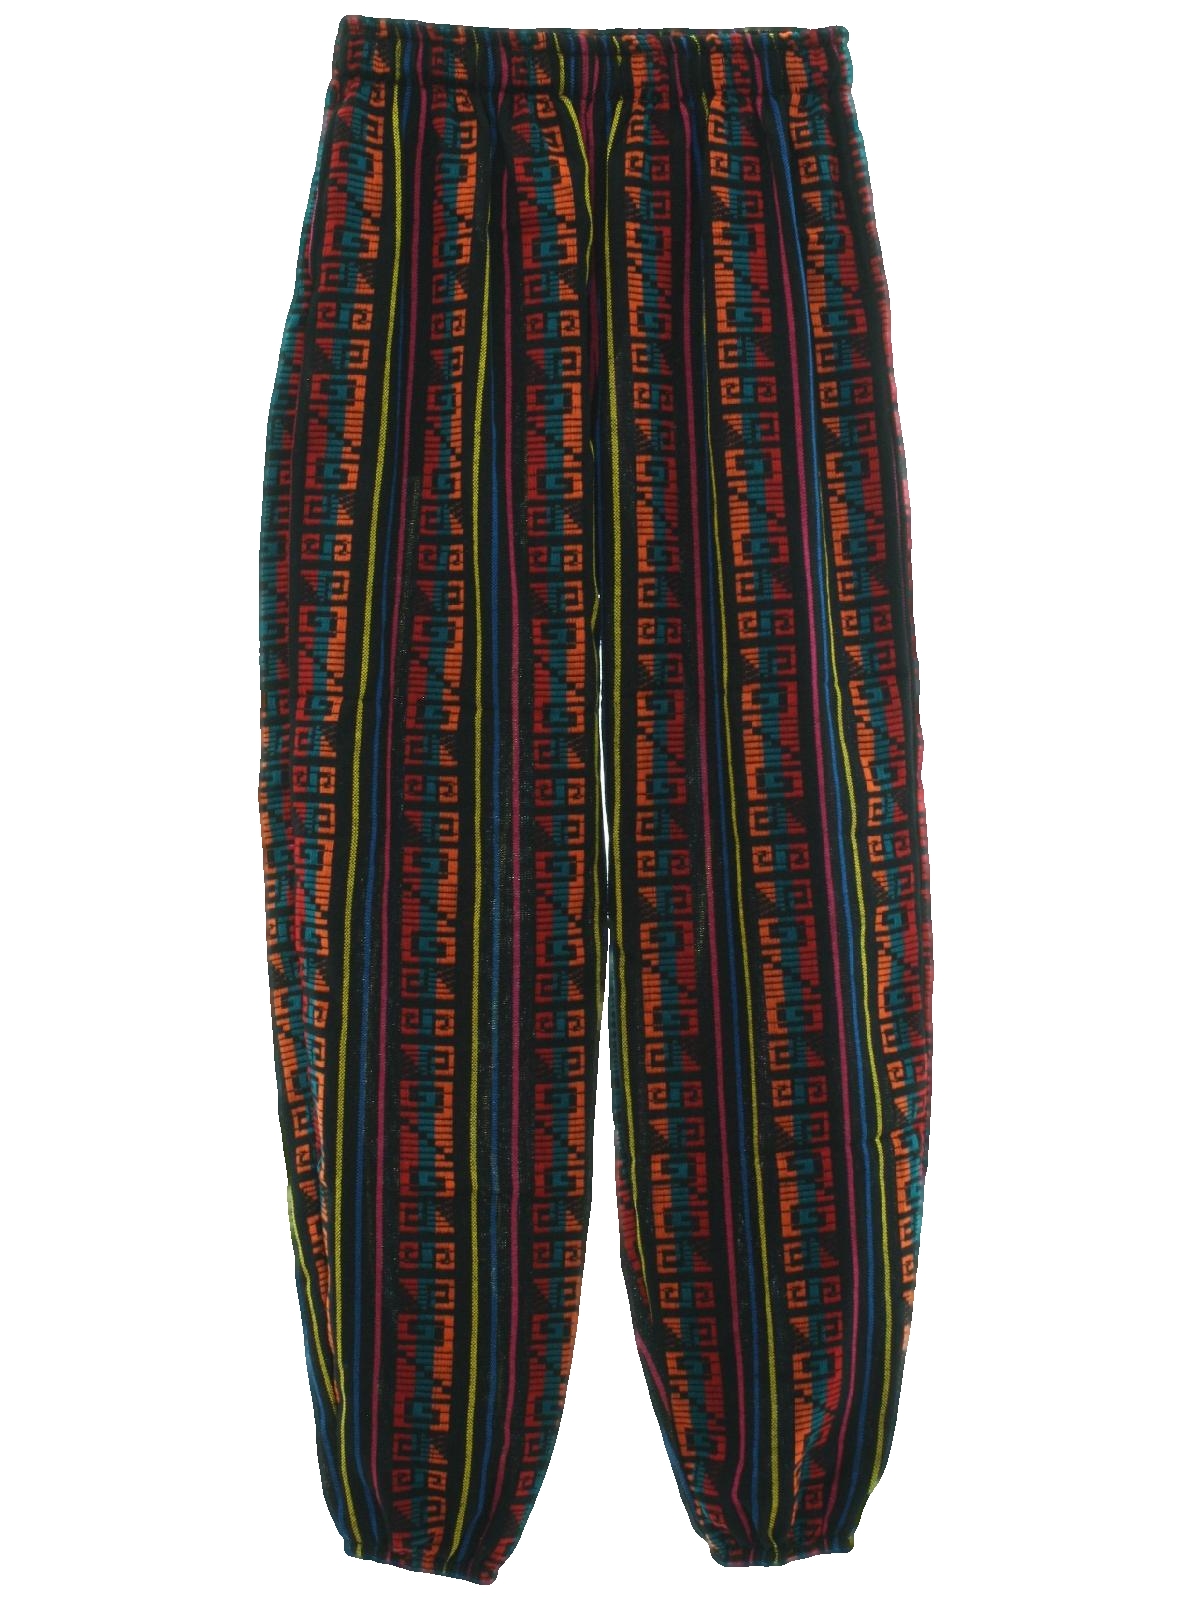 1980's Pants (Home Sewn): 80s Style (made recently) -Home Sewn- Mens ...